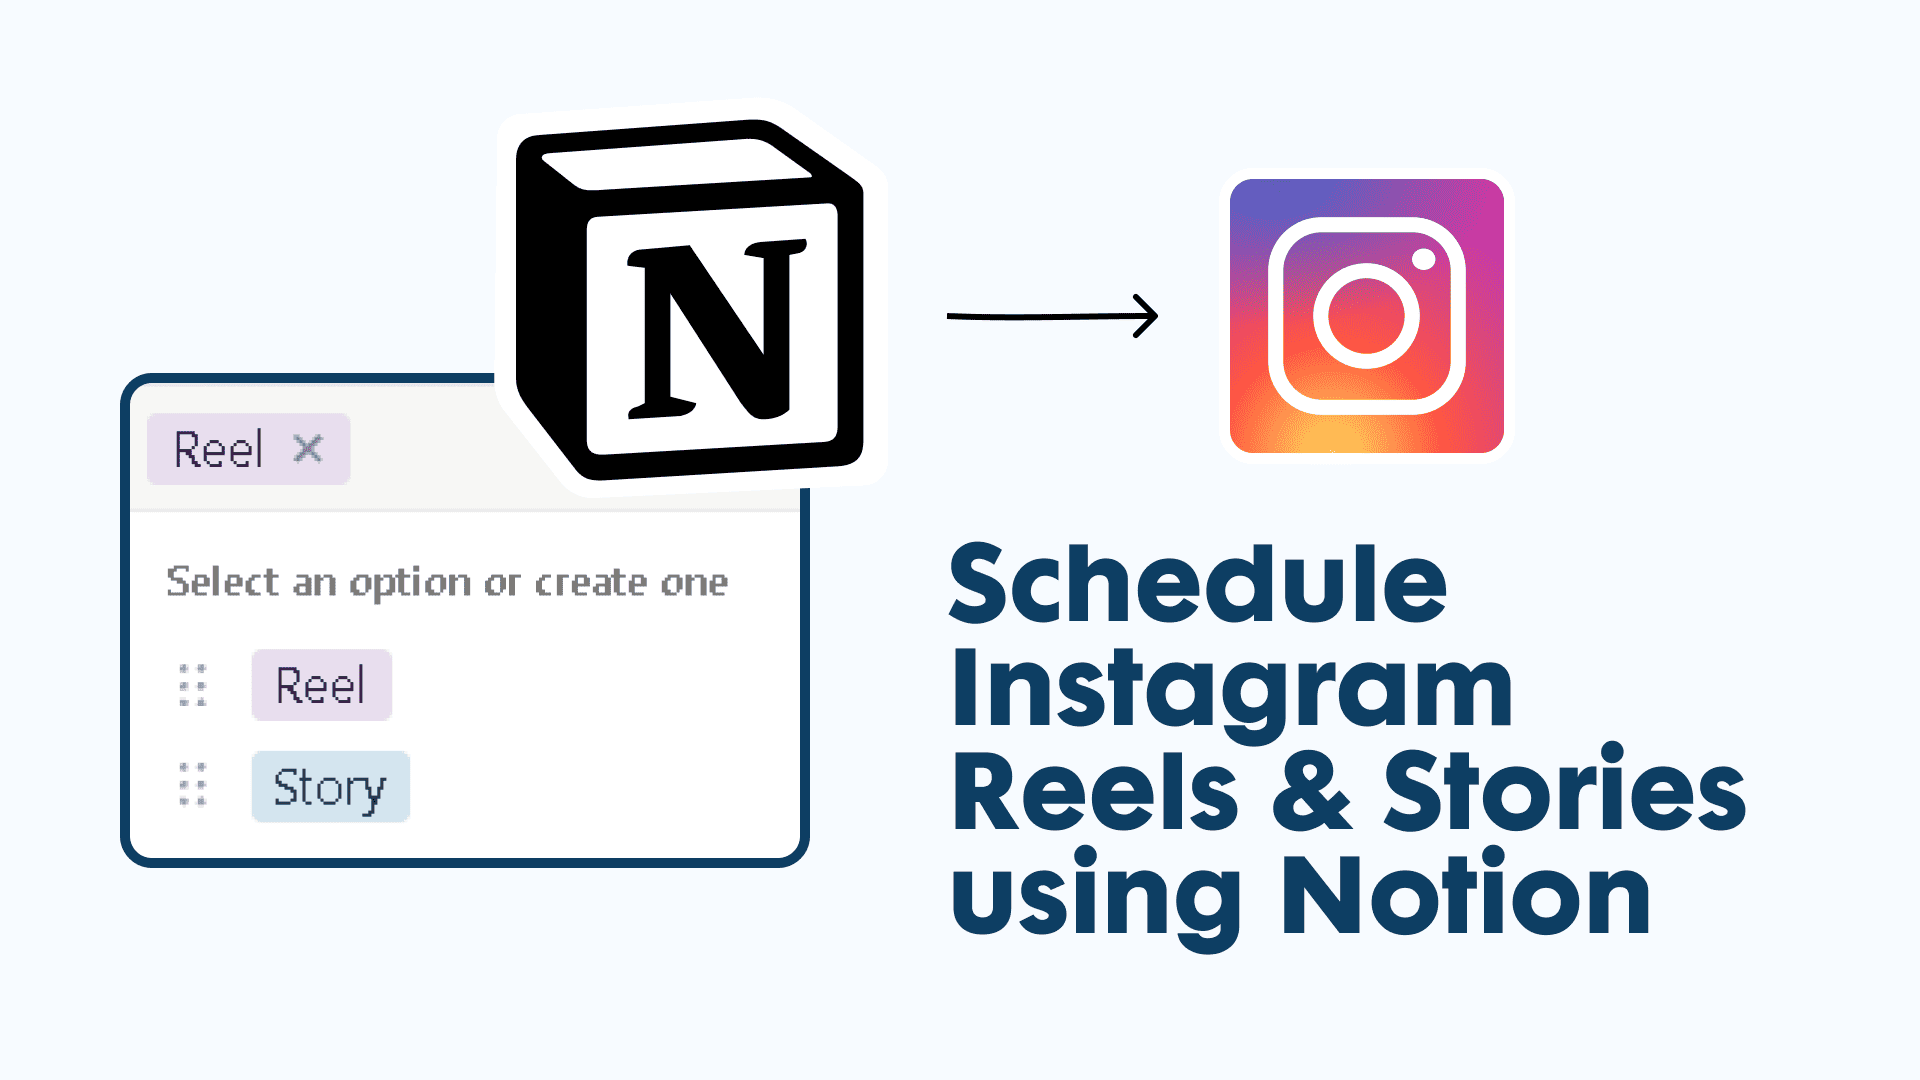 How to post reels & stories on Instagram using Notion?